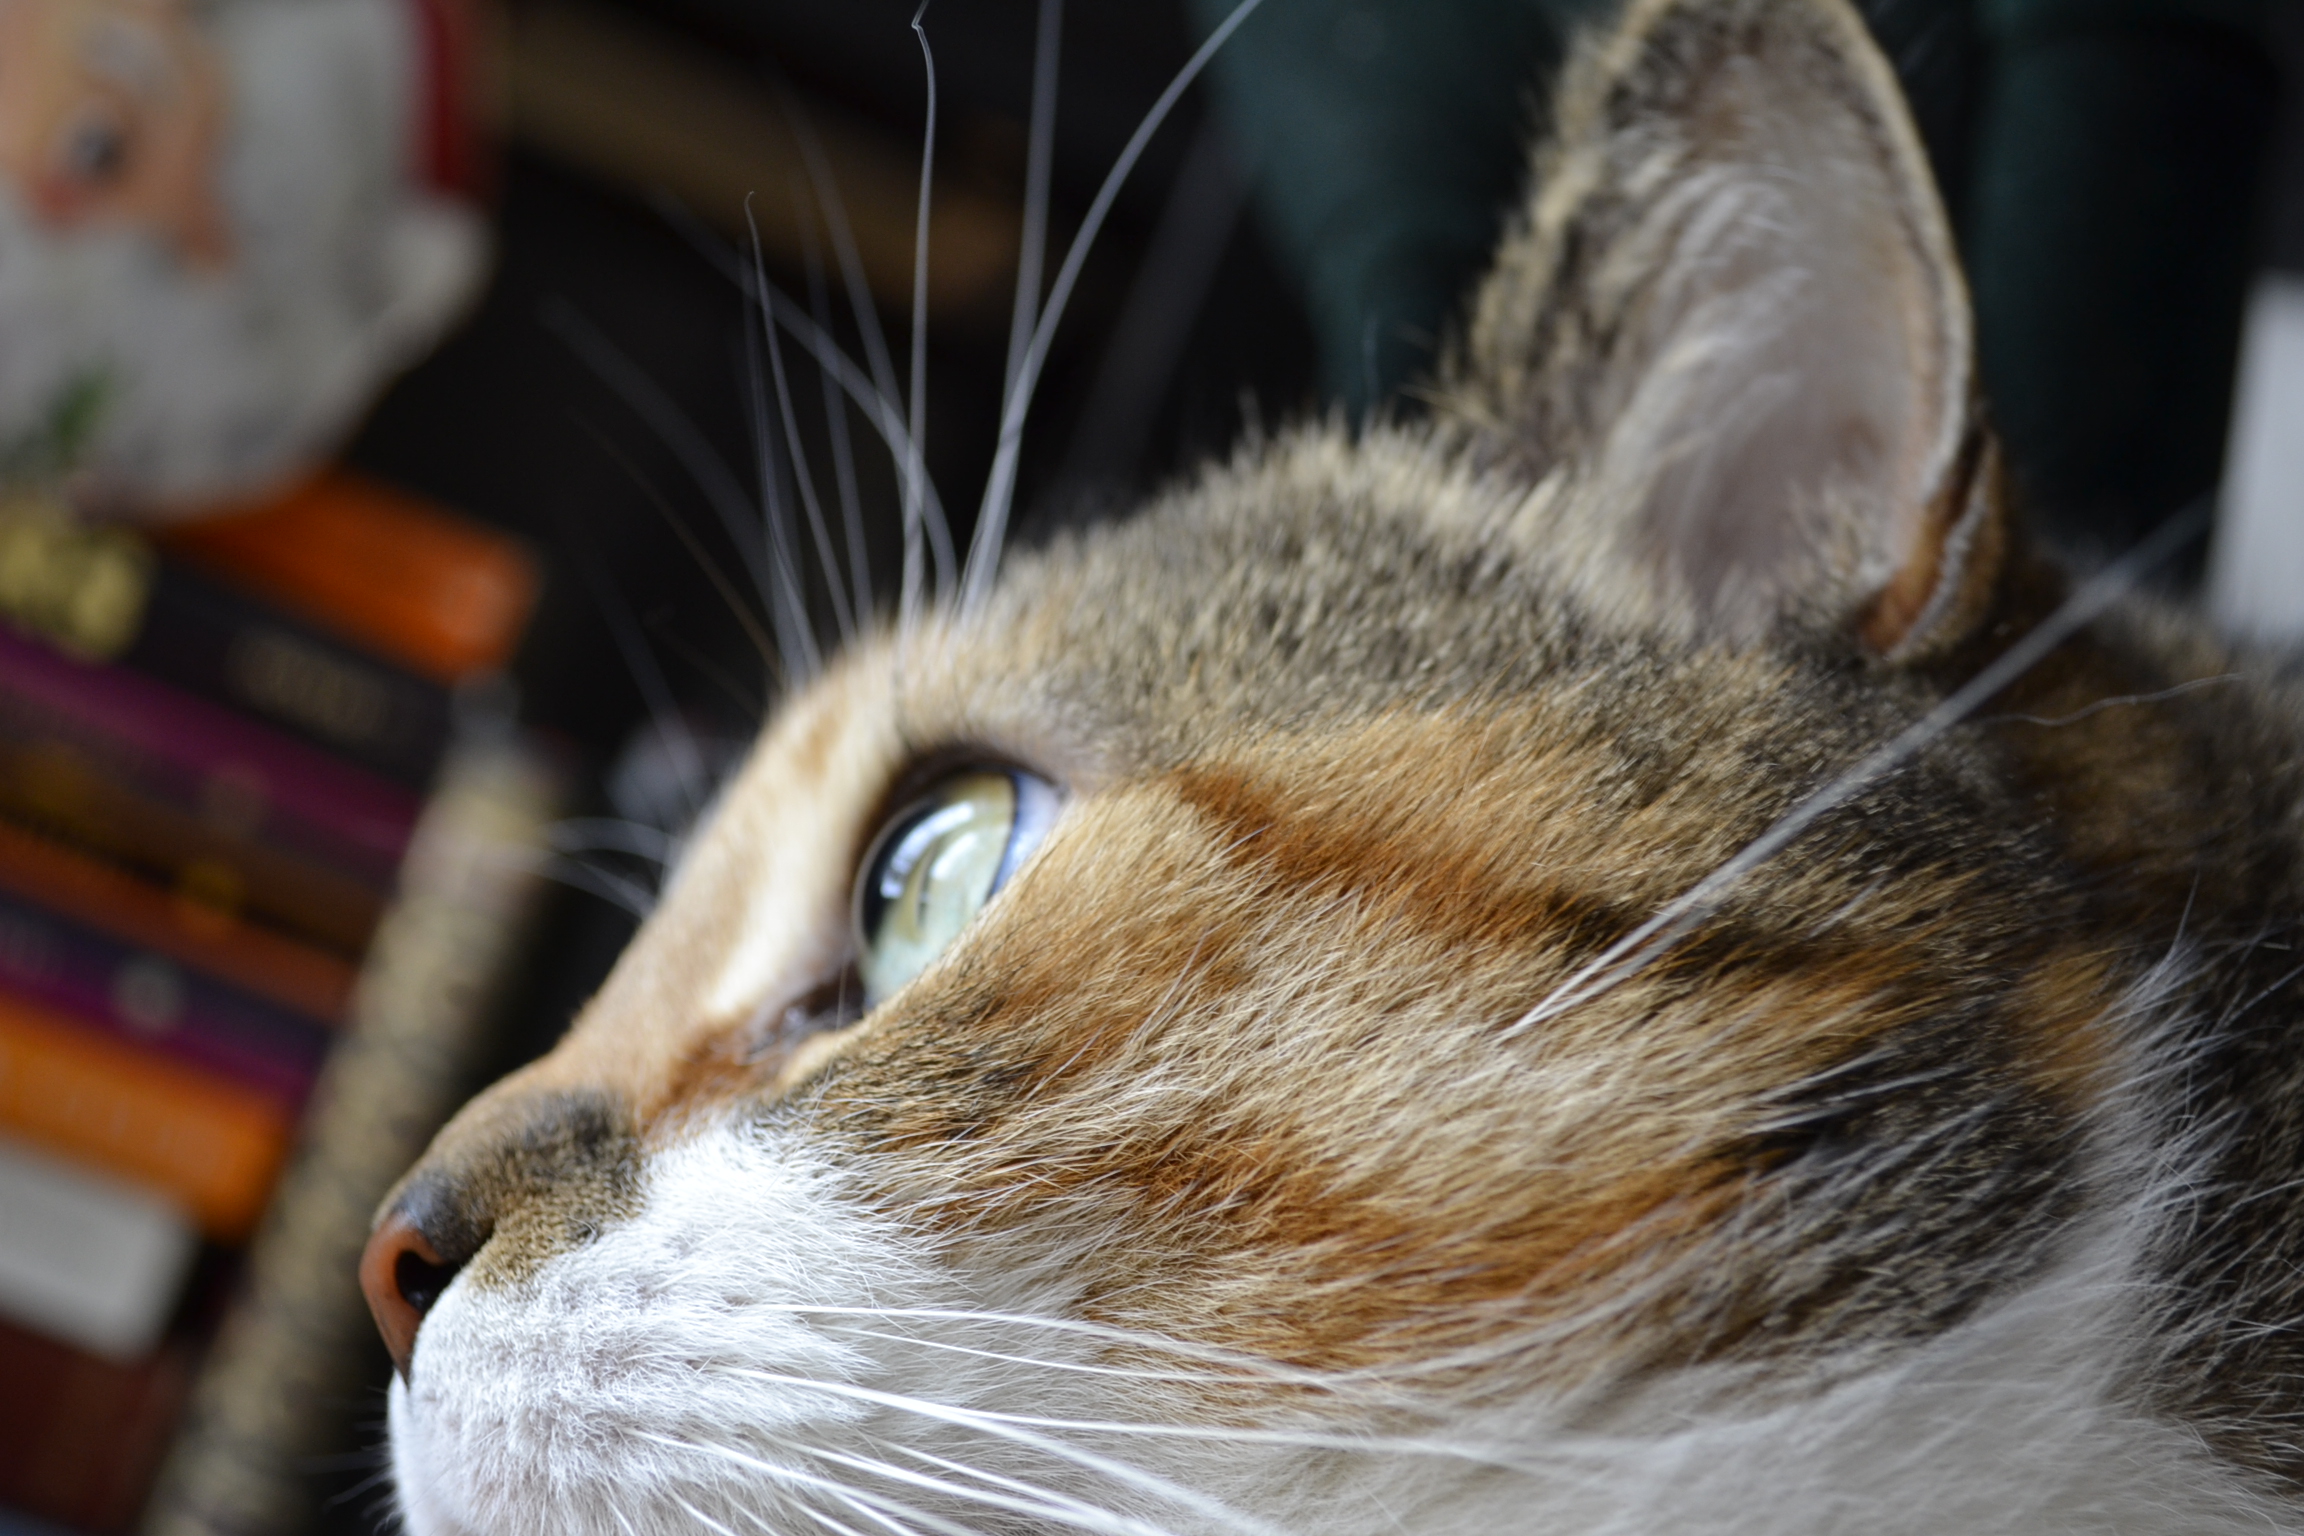 A calico tabby with big eyes looks off into the distance.